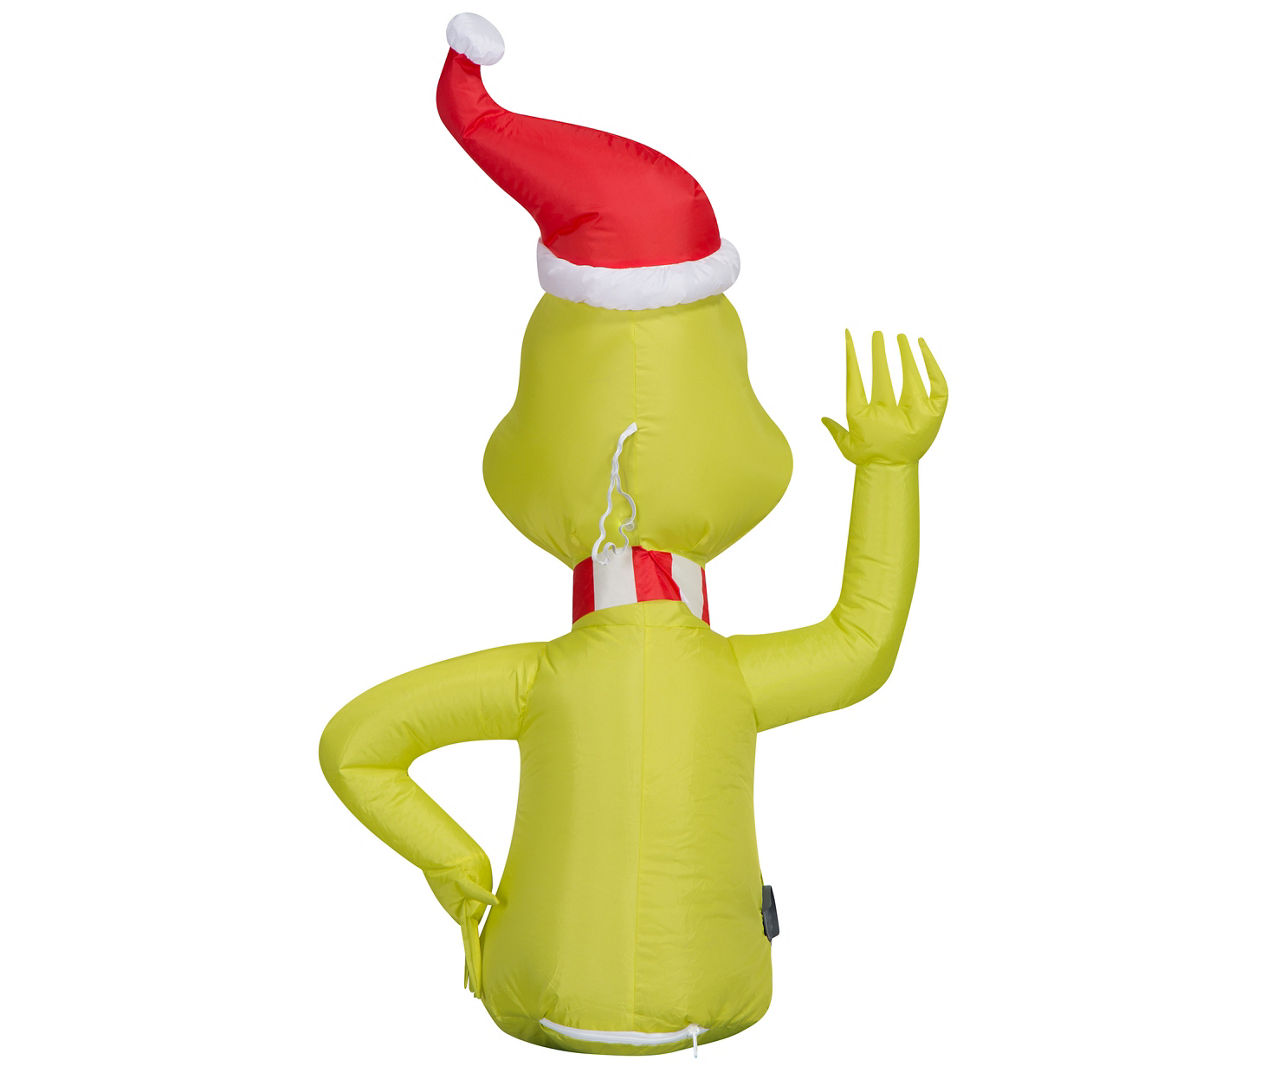  The Grinch Car Buddy Inflatable Christmas Decoration